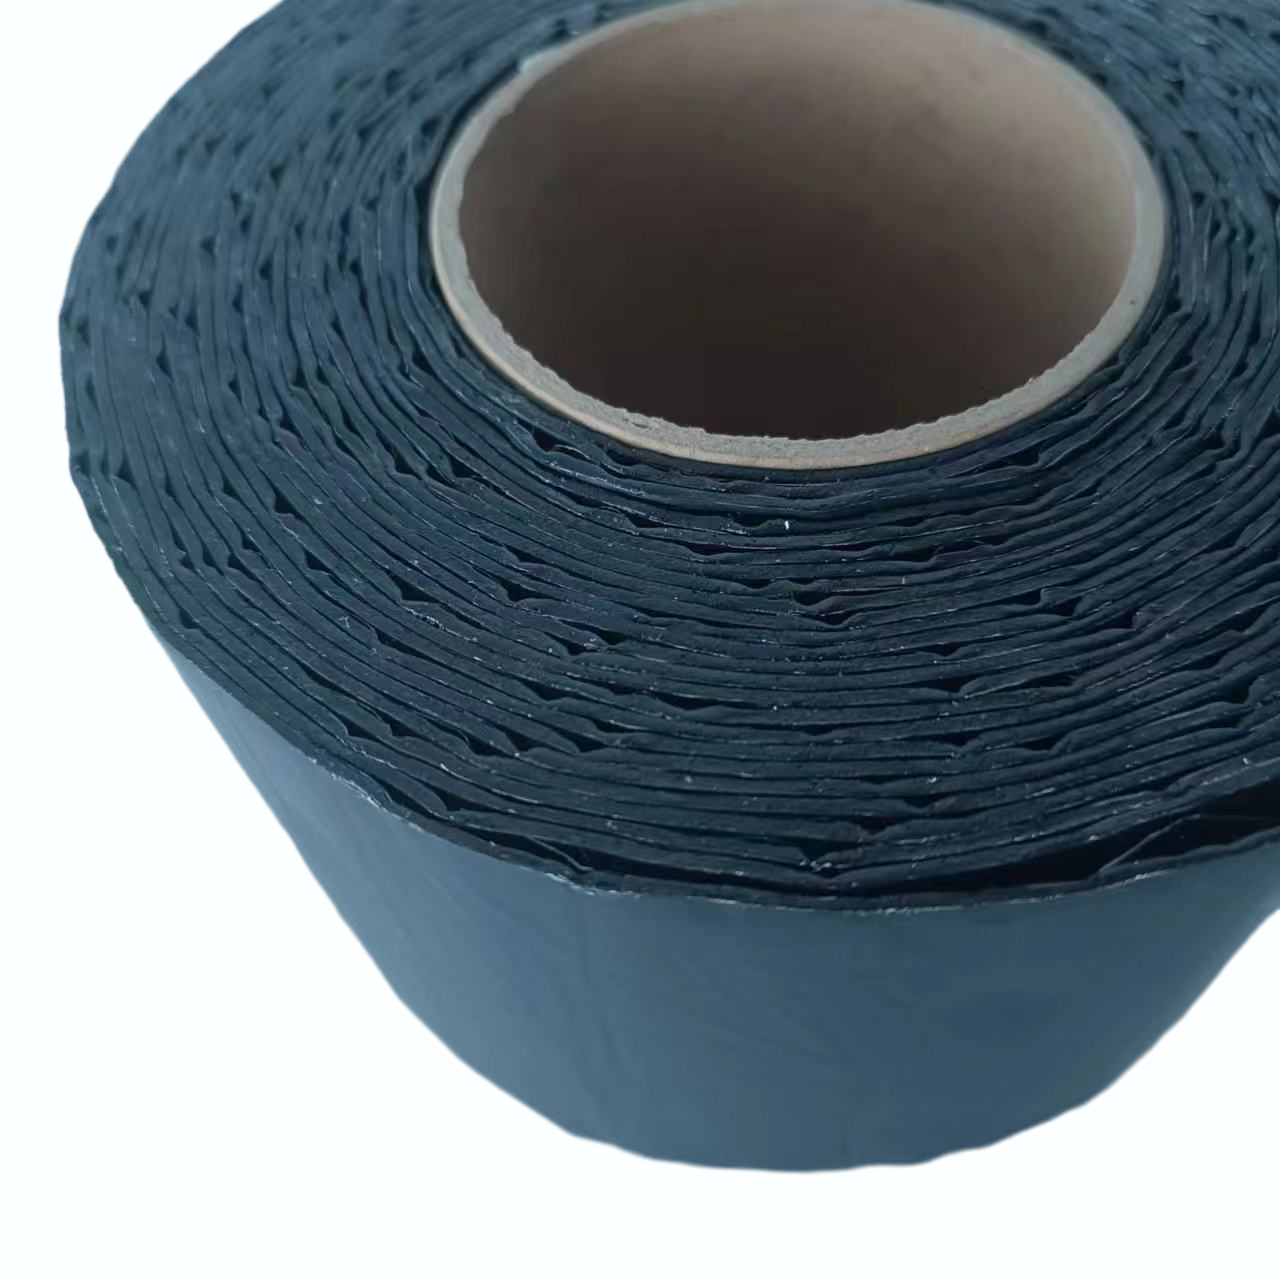 Self Adhesive Bitumen Tape for Joint Roof Sealing and Waterproofing